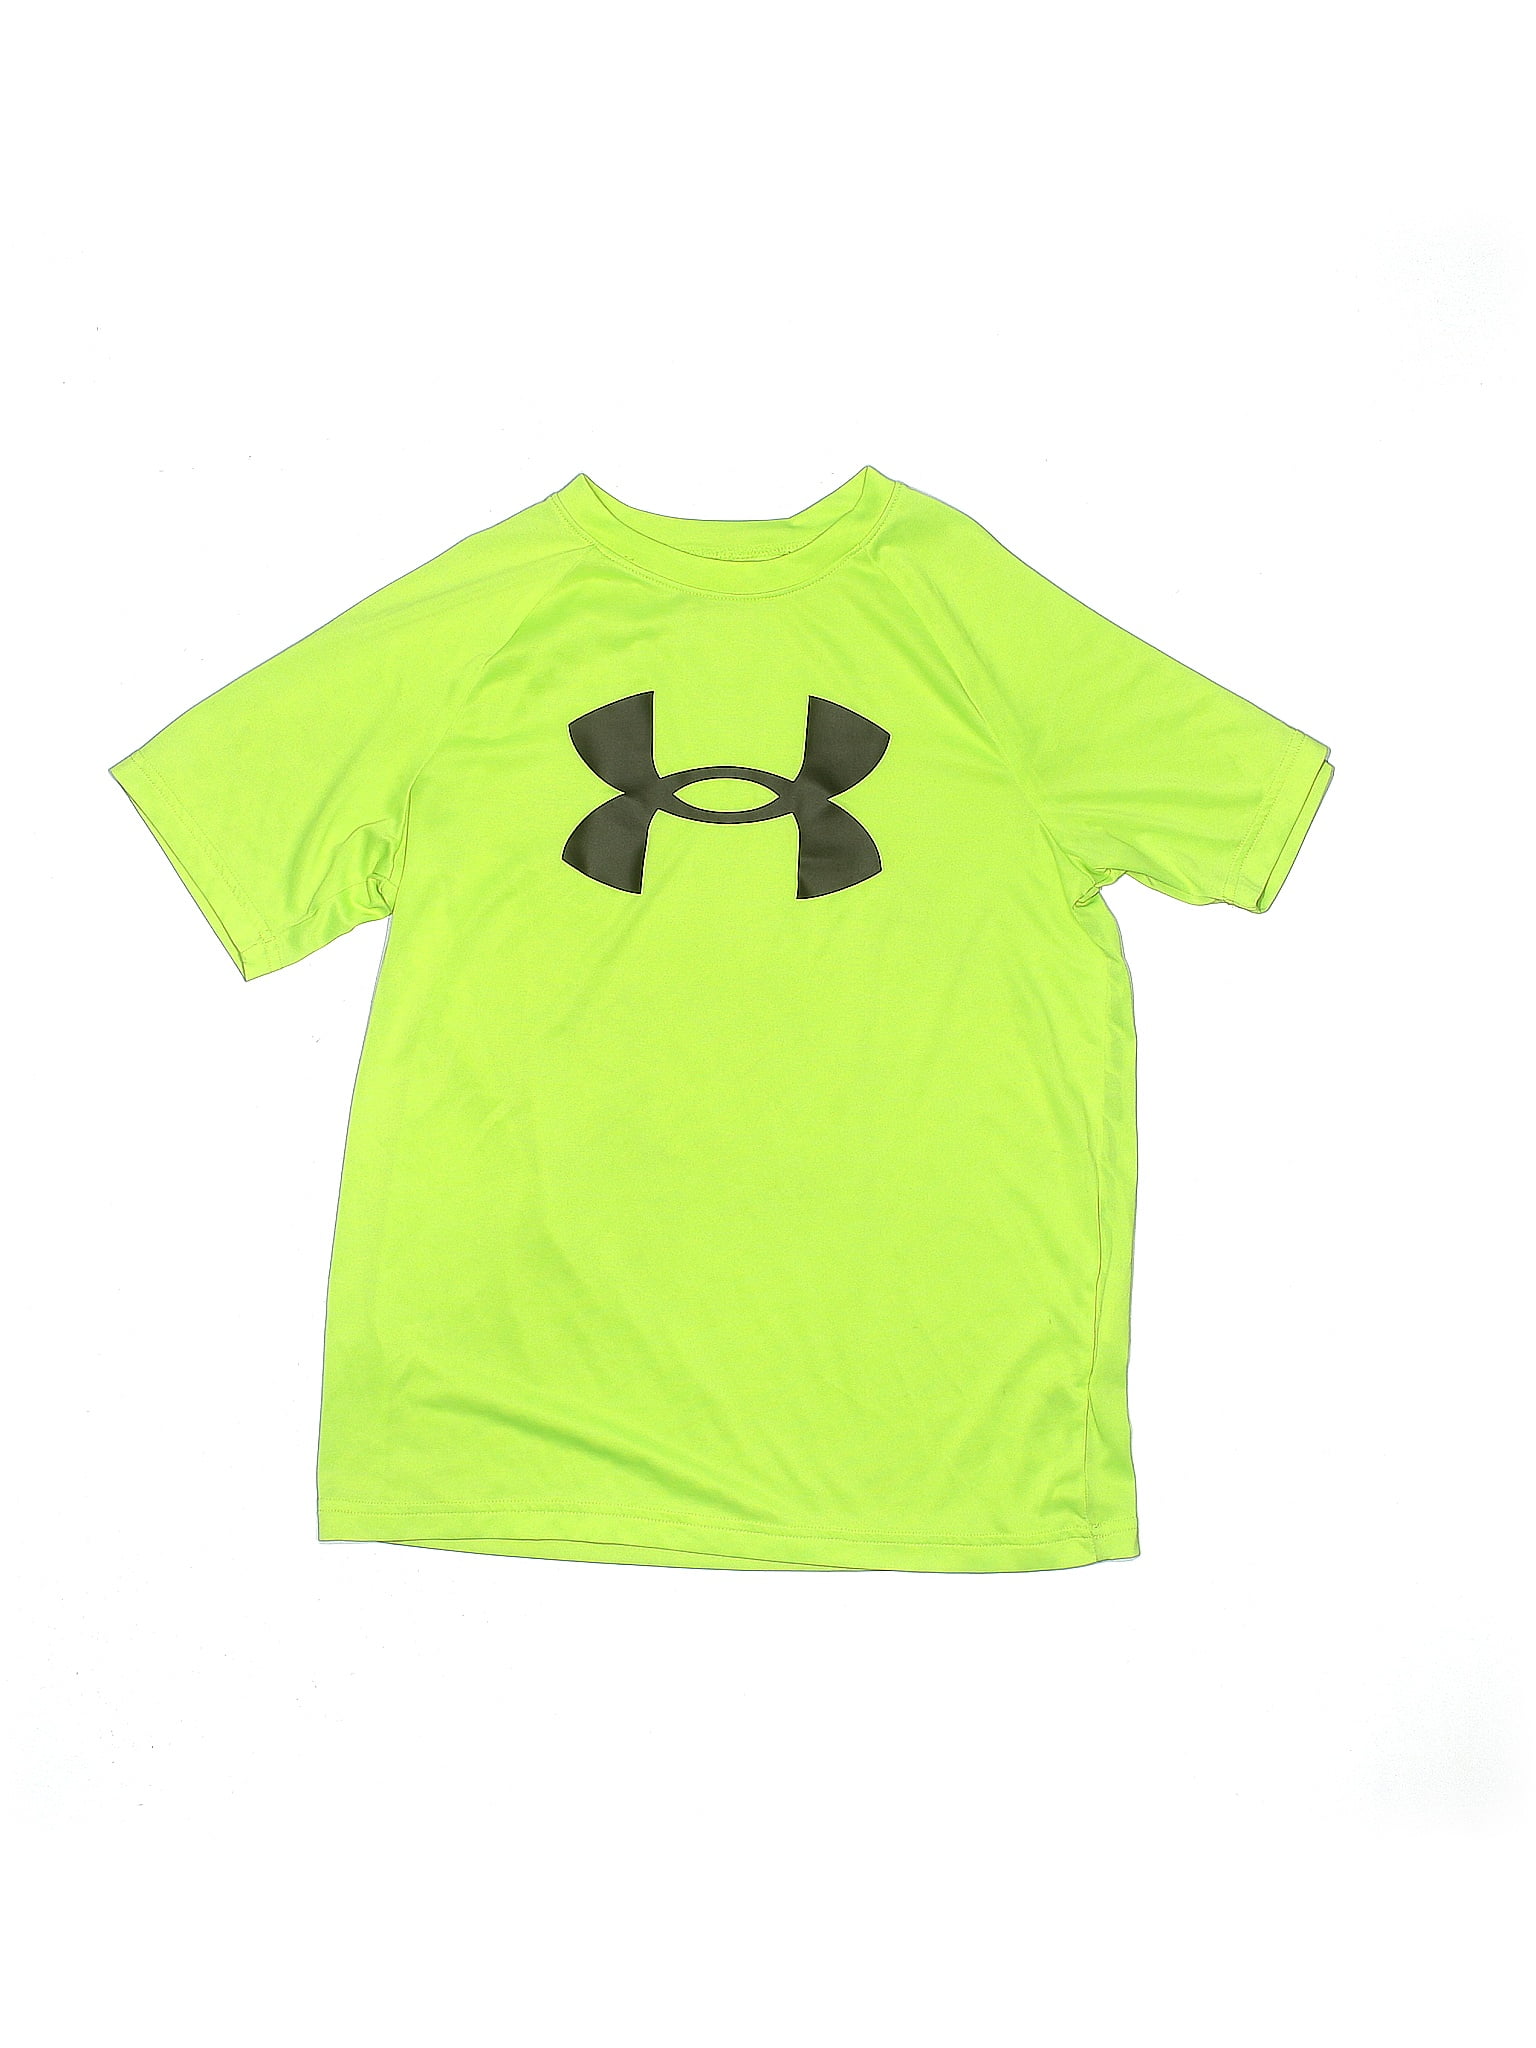 Under Armour Solid Green Active T-Shirt Size L (Youth) - 48% off